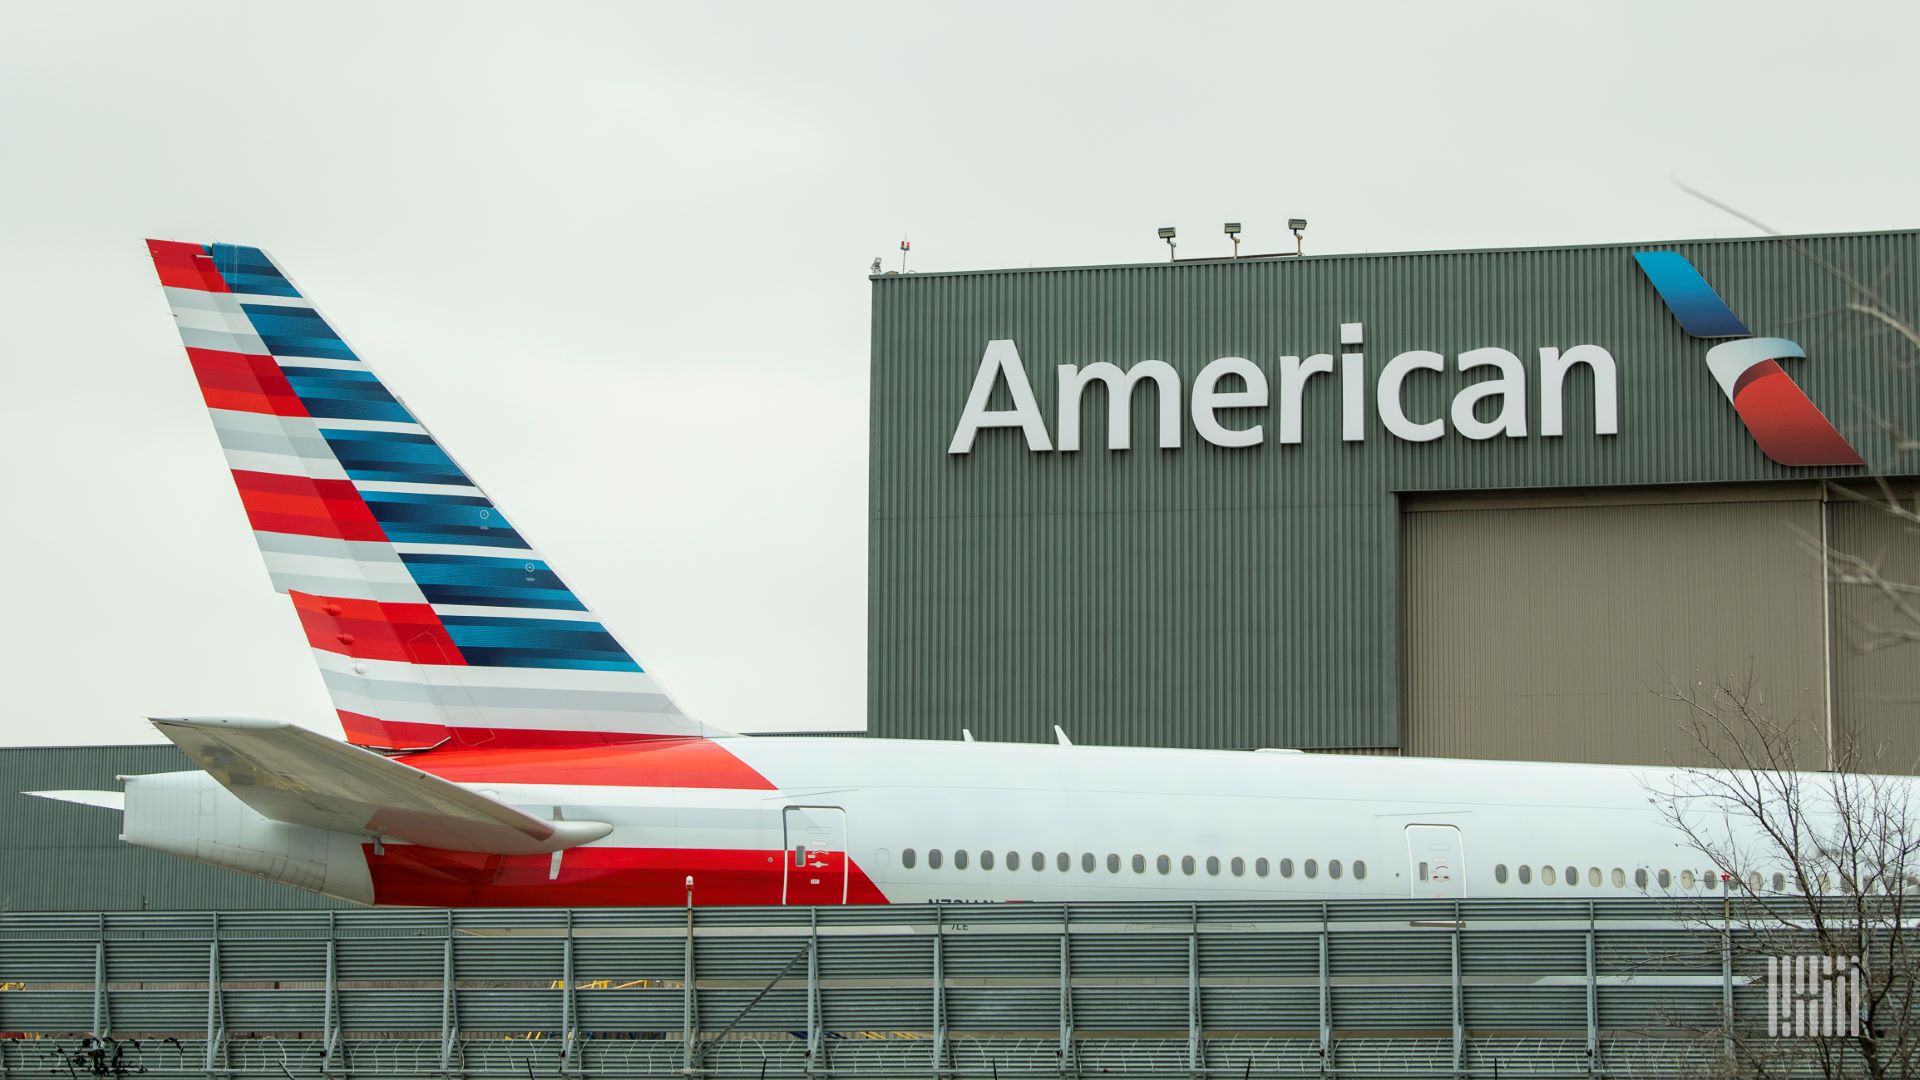 Tail end of a red, white and blue American Airlines jet close to an American hangar with the brand name on front.